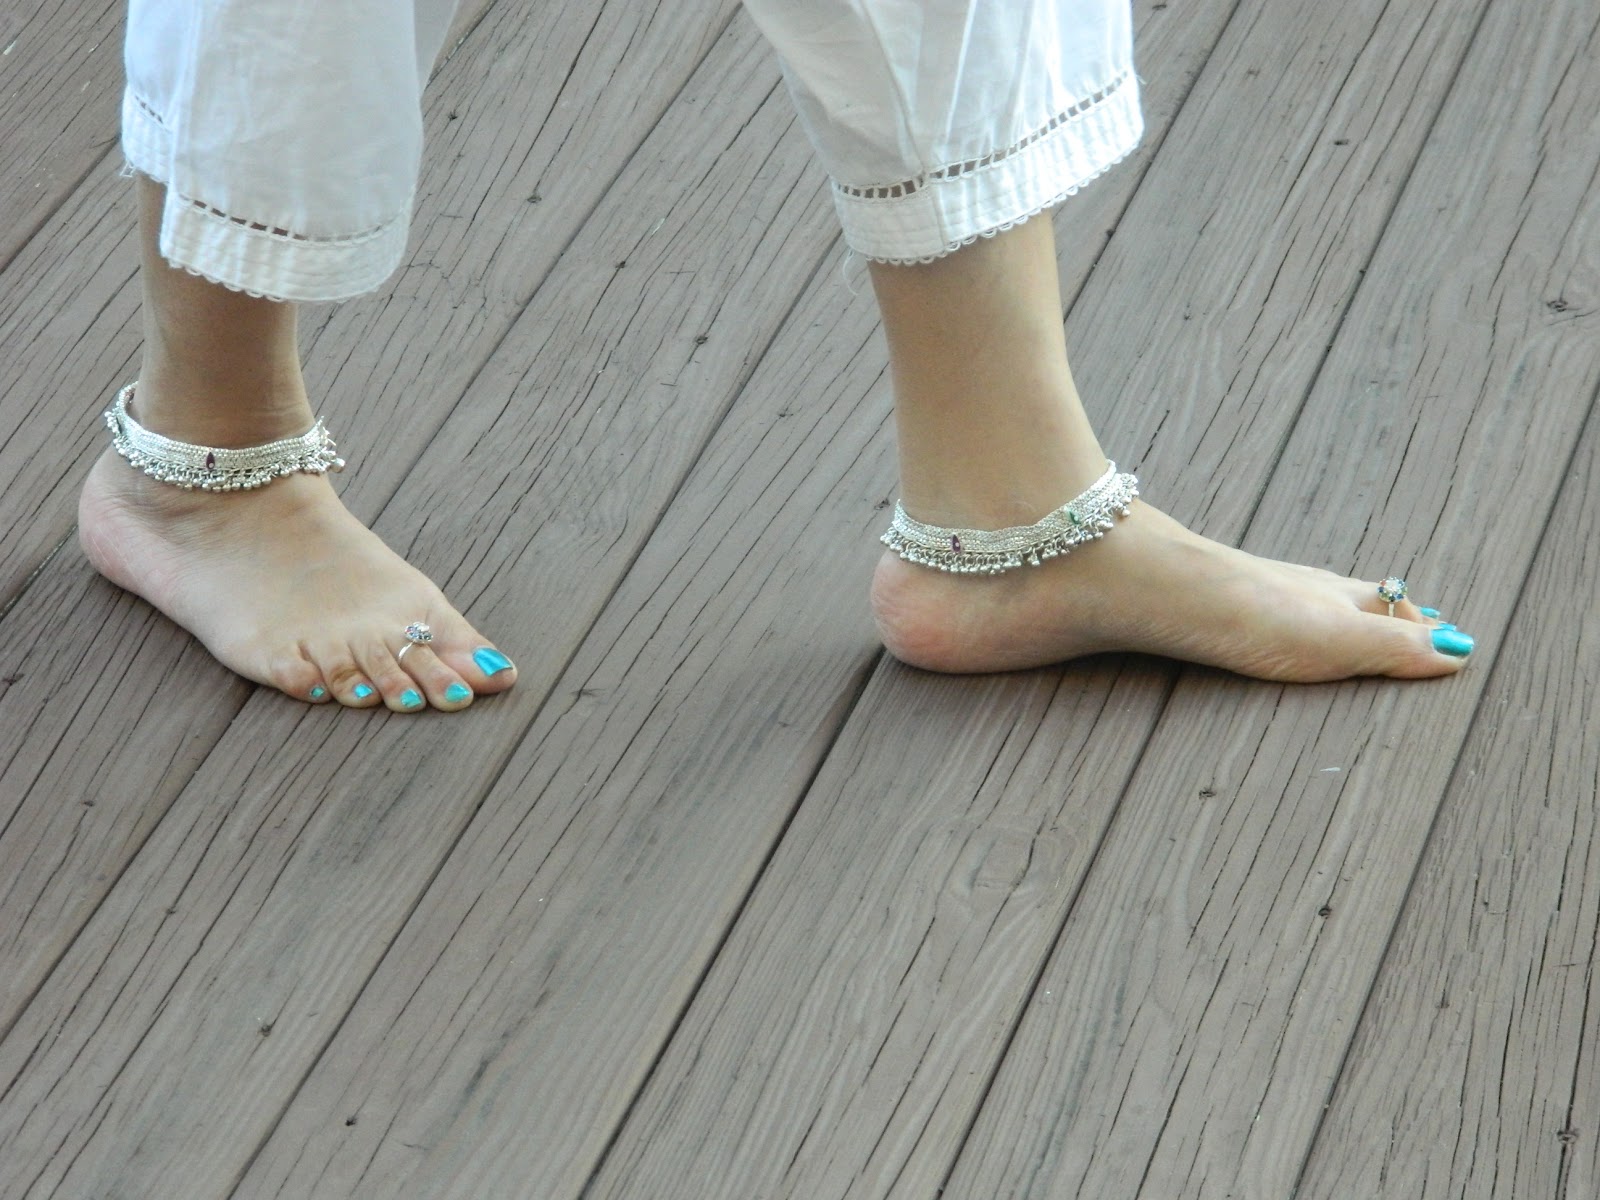 Foot search. Анклет на ногу. Indian feet. Indian Anklet feet. Barefoot Forever.